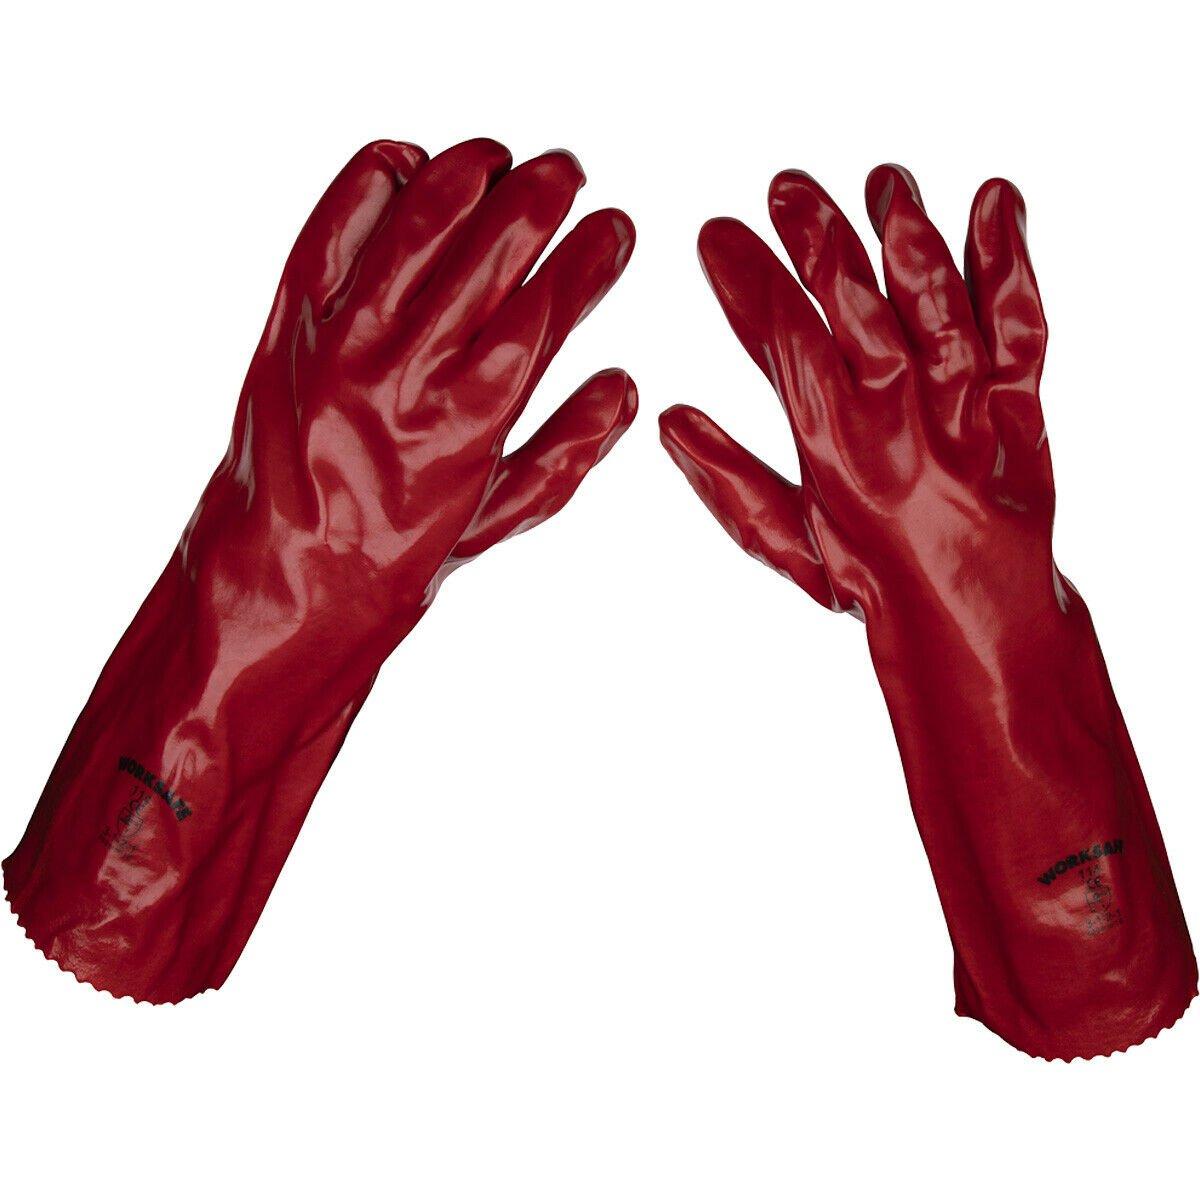 120 PAIRS Red PVC Gauntlets - Forearm Protection - 450mm - Waterproof Protection